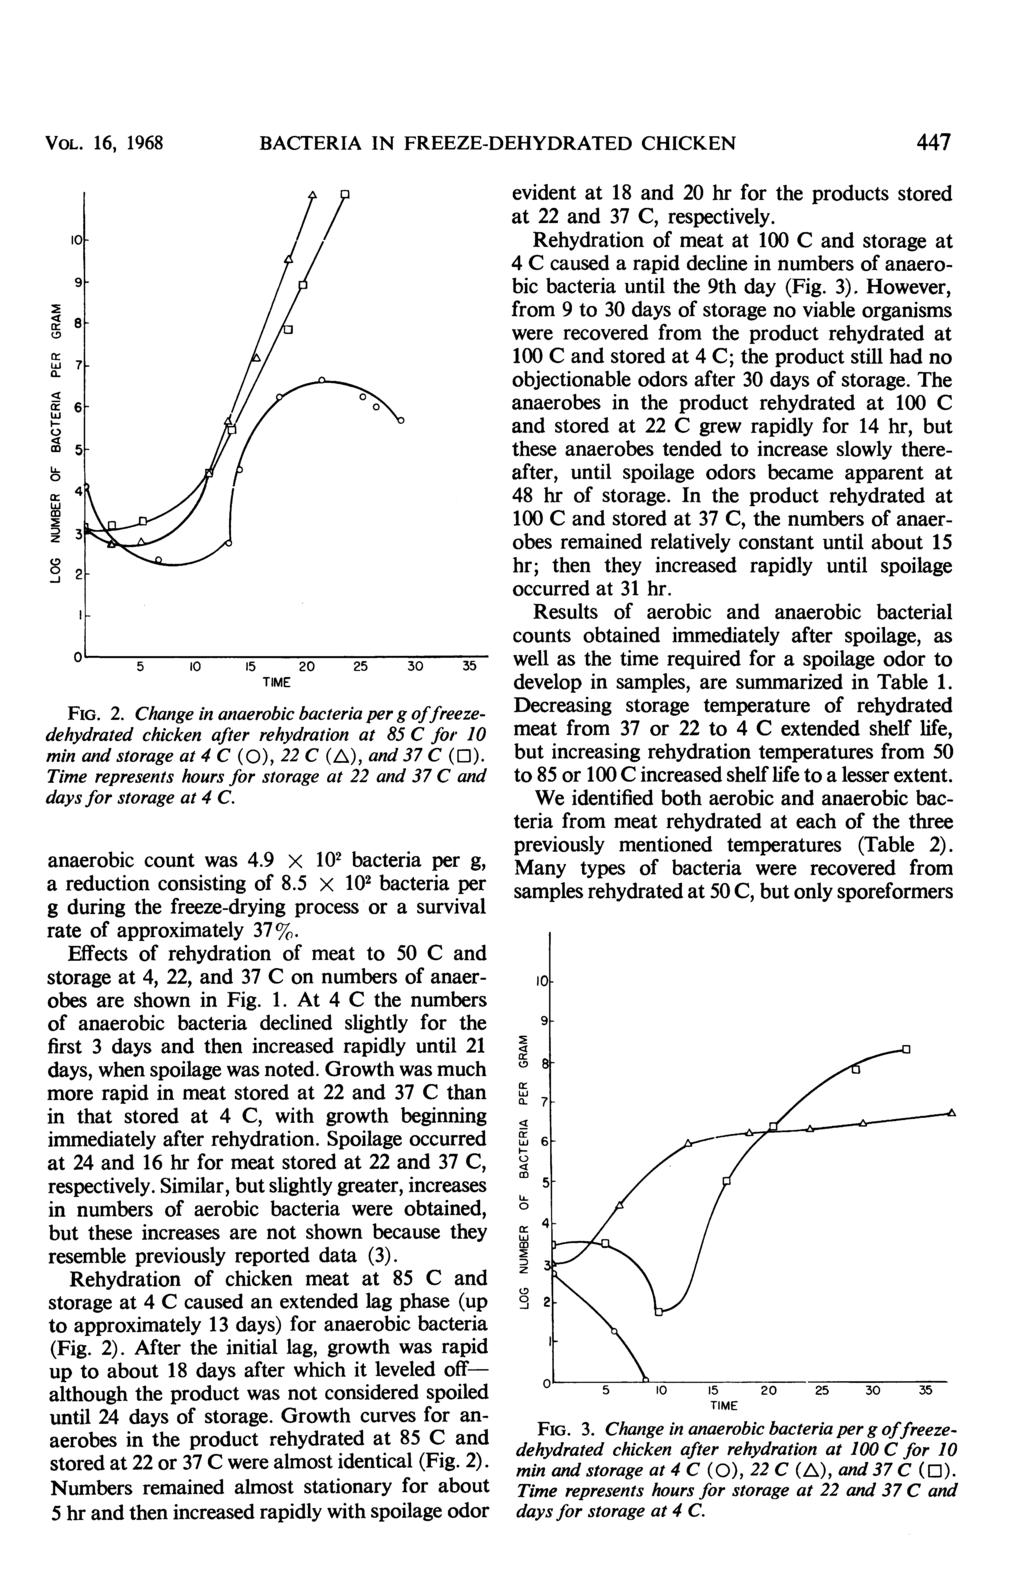 VOL. 16, 1968 BACTERIA IN FREEZE-DEHYDRATED CHICKEN 447 m 2 